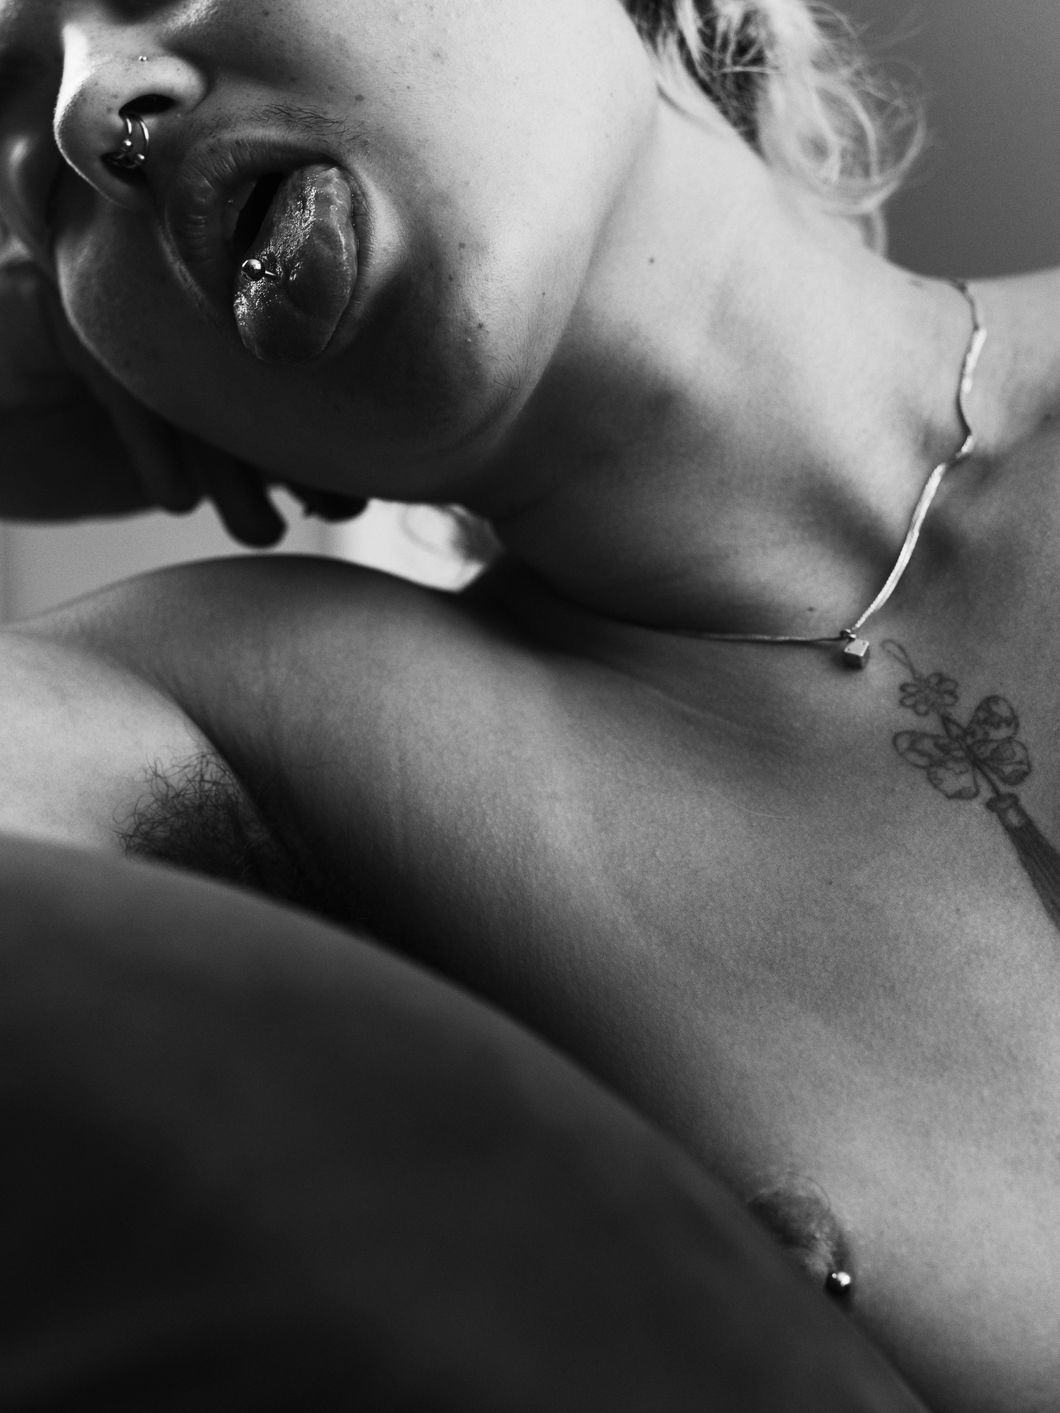 Black and white close-up of a topless person, showing half of their face, chest and throat. Their nipple, nose and tongue (sticking out) are pierced. They wear a thin necklace and their chest is tattooed. © Ricardo Nagaoka